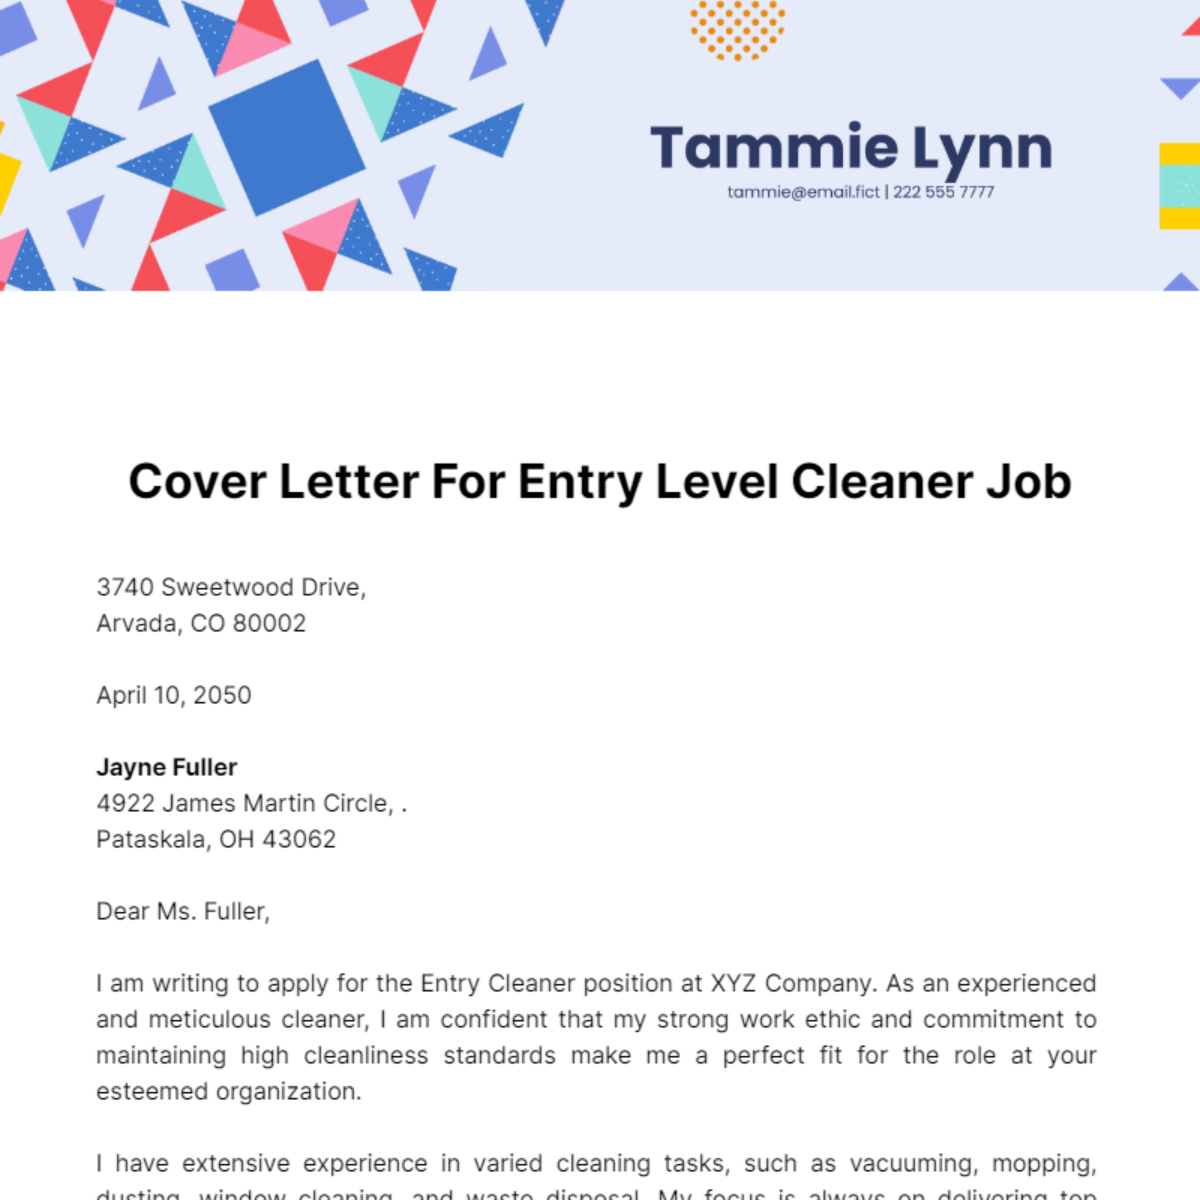 Cover Letter for Entry Level Cleaner Job Template